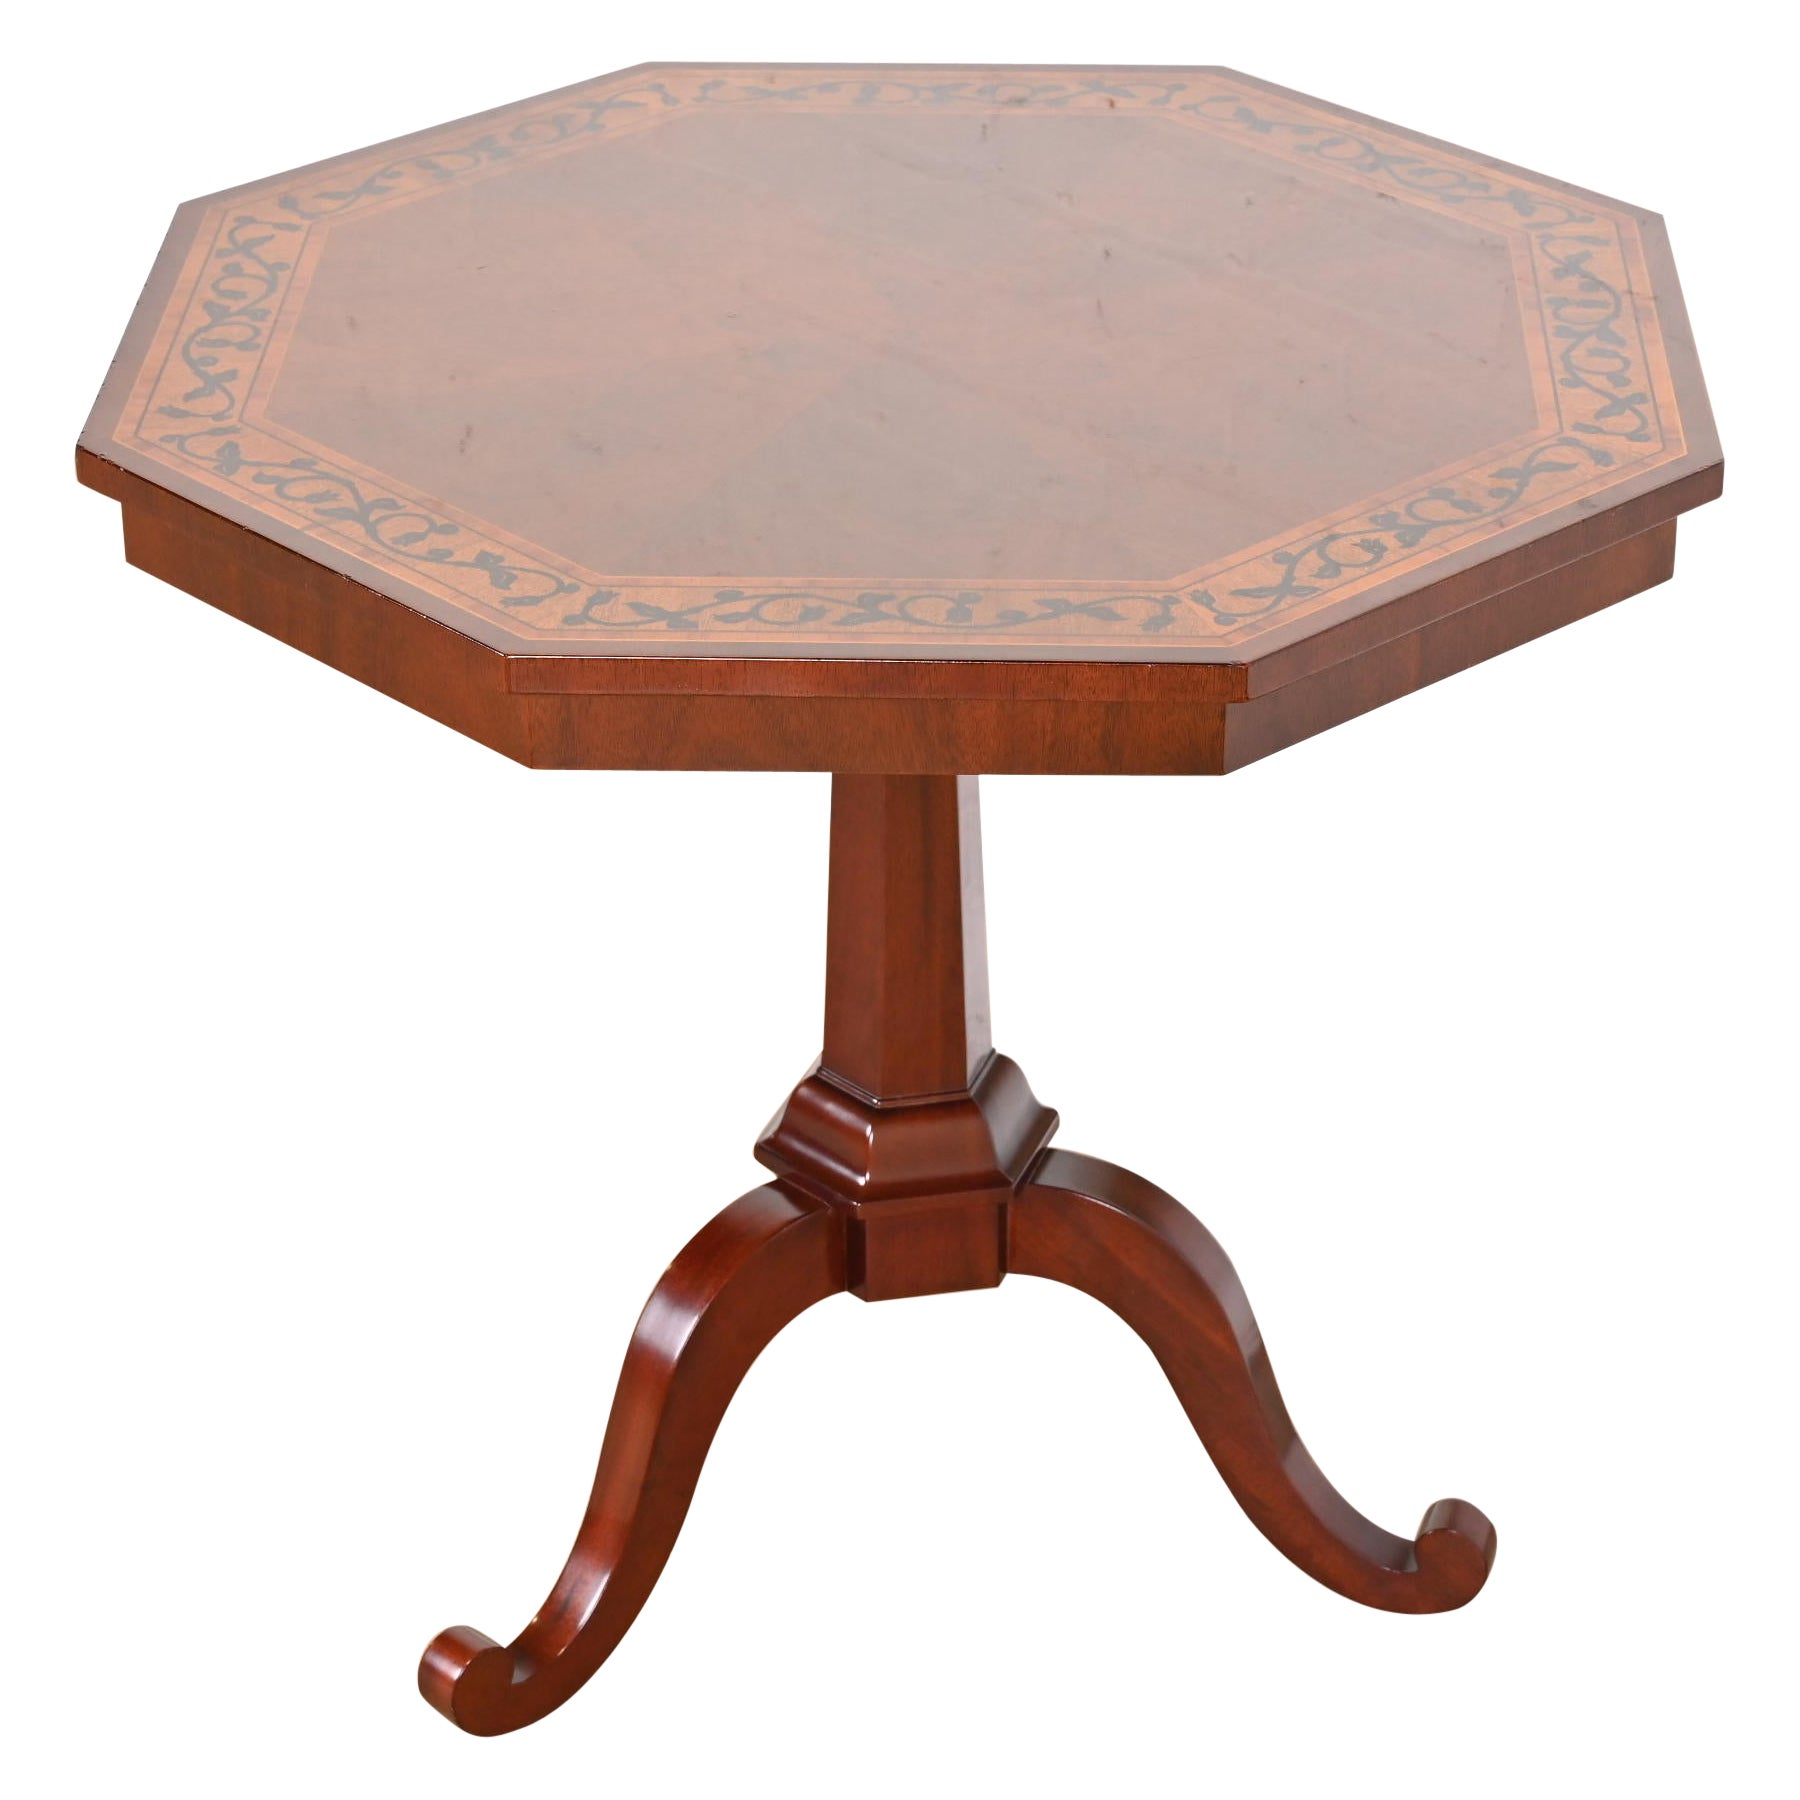 Kindel Furniture Regency Mahogany Inlaid Marquetry Pedestal Tea Table For Sale